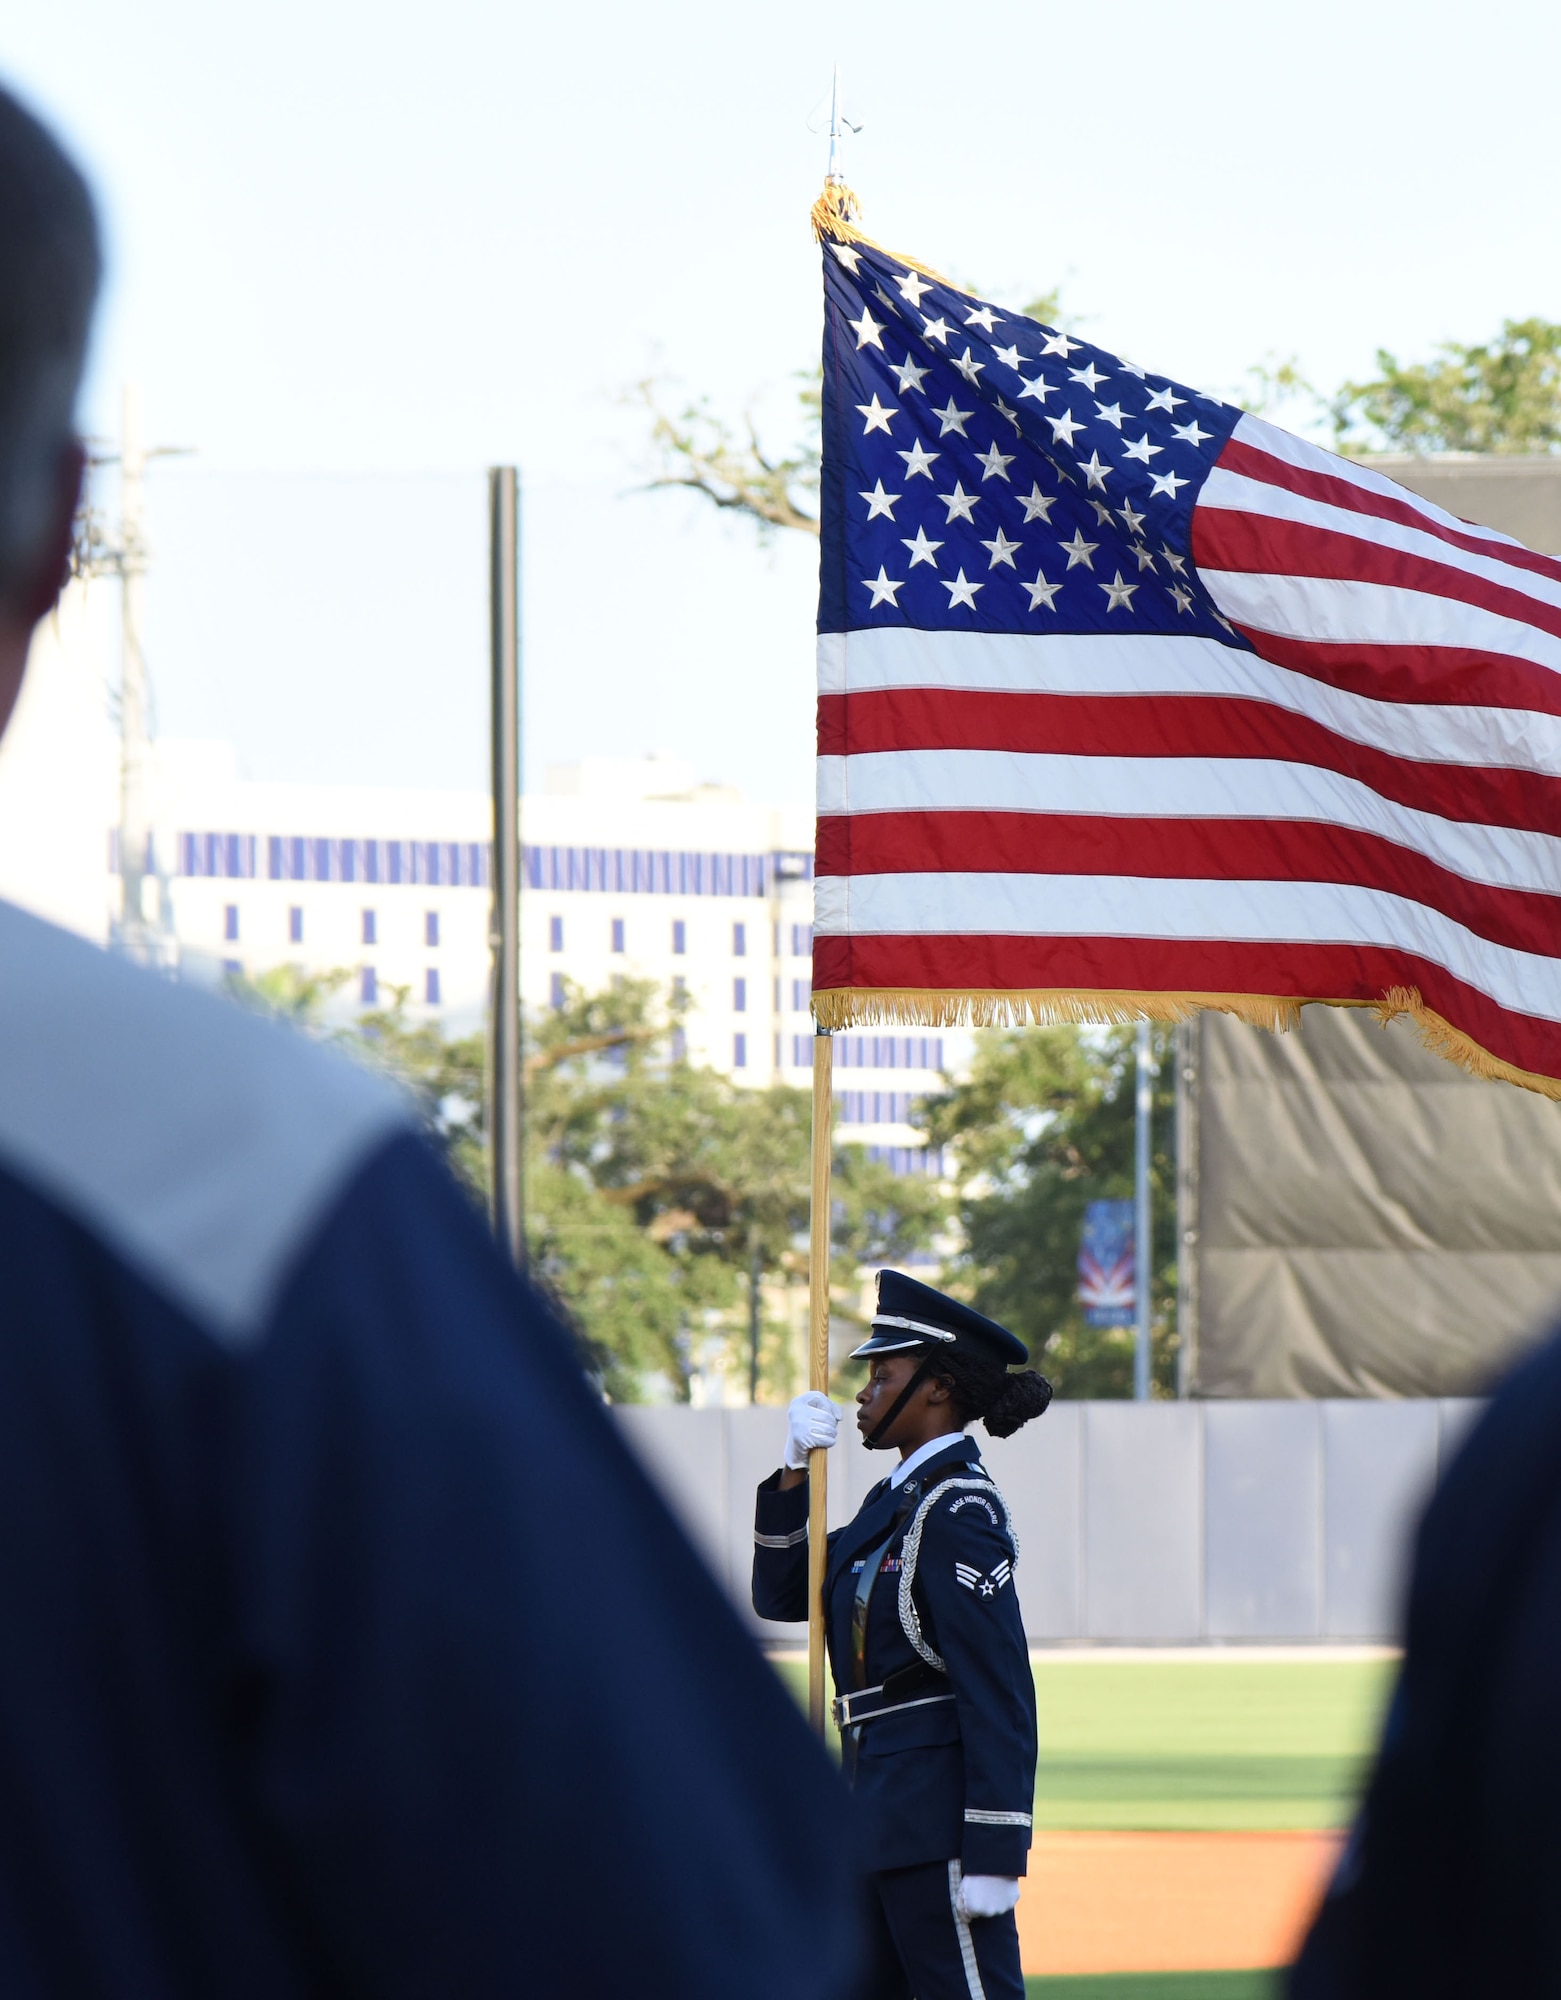 Senior Airman Quontalia Shephard, Keesler Air Force Base Honor Guard member, marches with the U.S. flag during the Biloxi Shuckers Minor League Baseball team’s military appreciation night July 31, 2017, in Biloxi, Miss. The Shuckers recognized and honored service members and their families for serving the nation. (U.S. Air Force photo by Kemberly Groue)